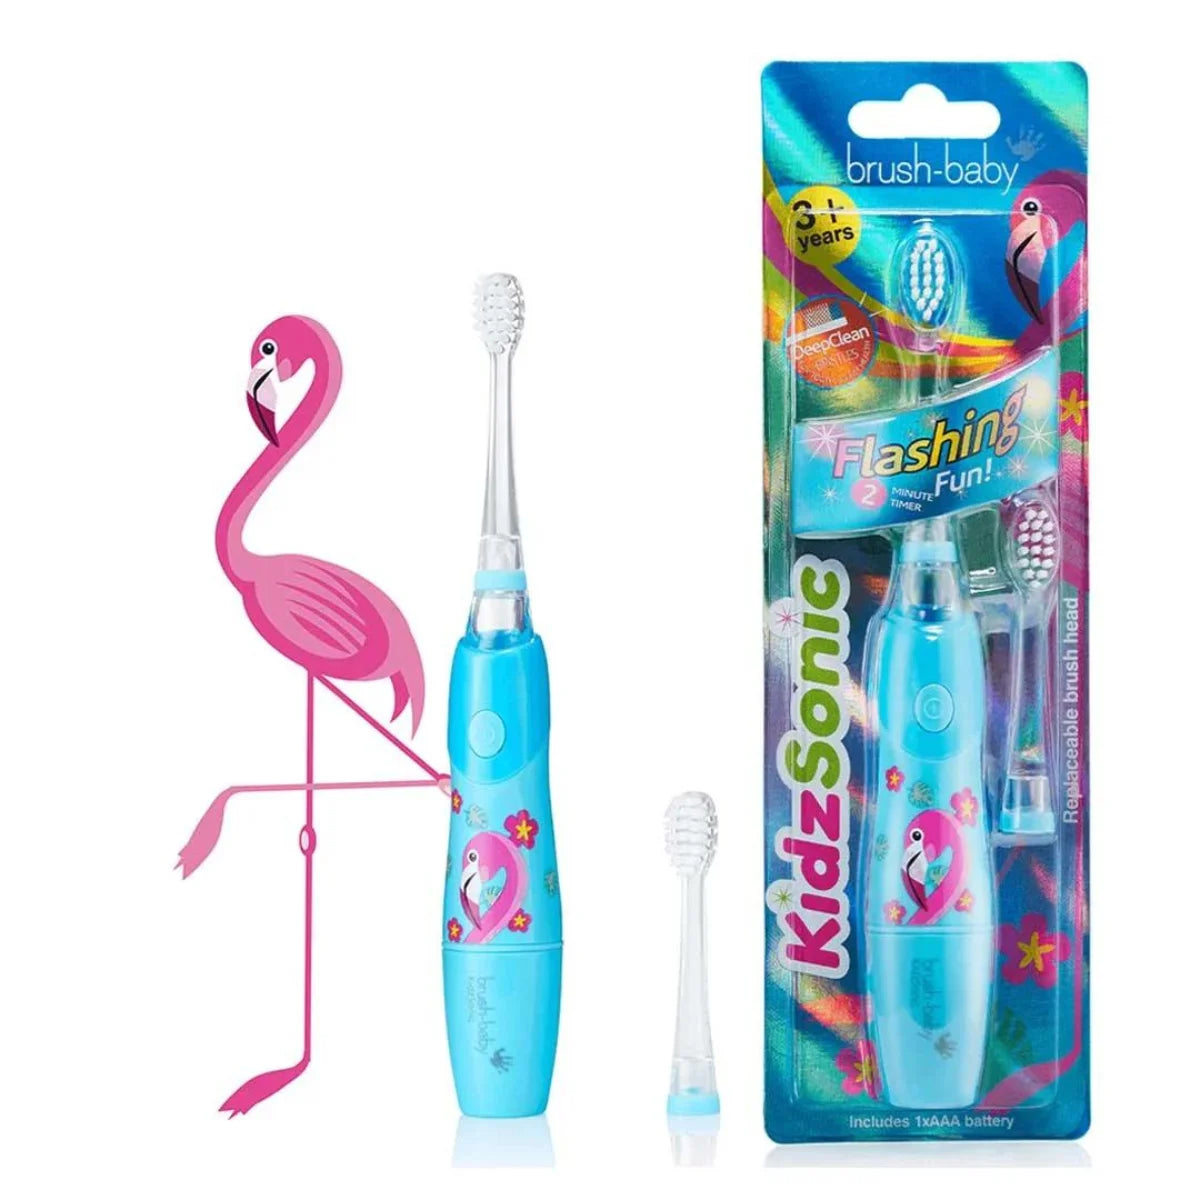 Fabio Flamingo Electric Toothbrush for kids  with replacement brush head